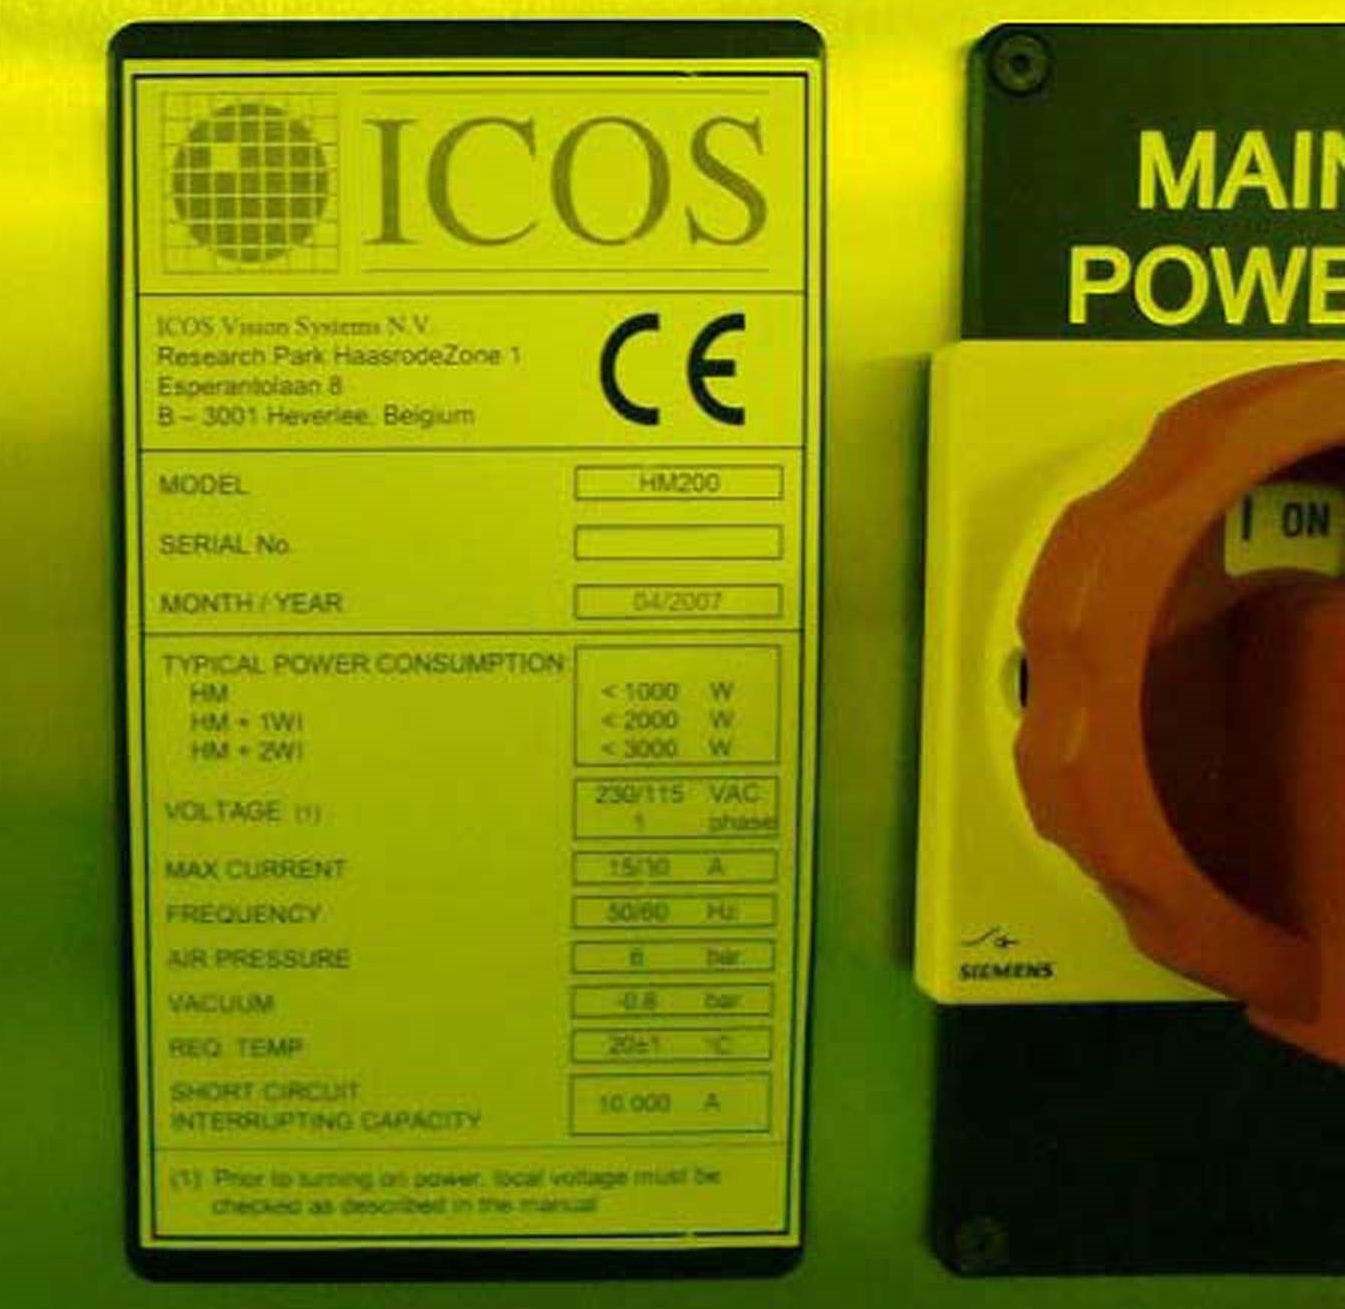 Photo Used ICOS WI-2000 For Sale